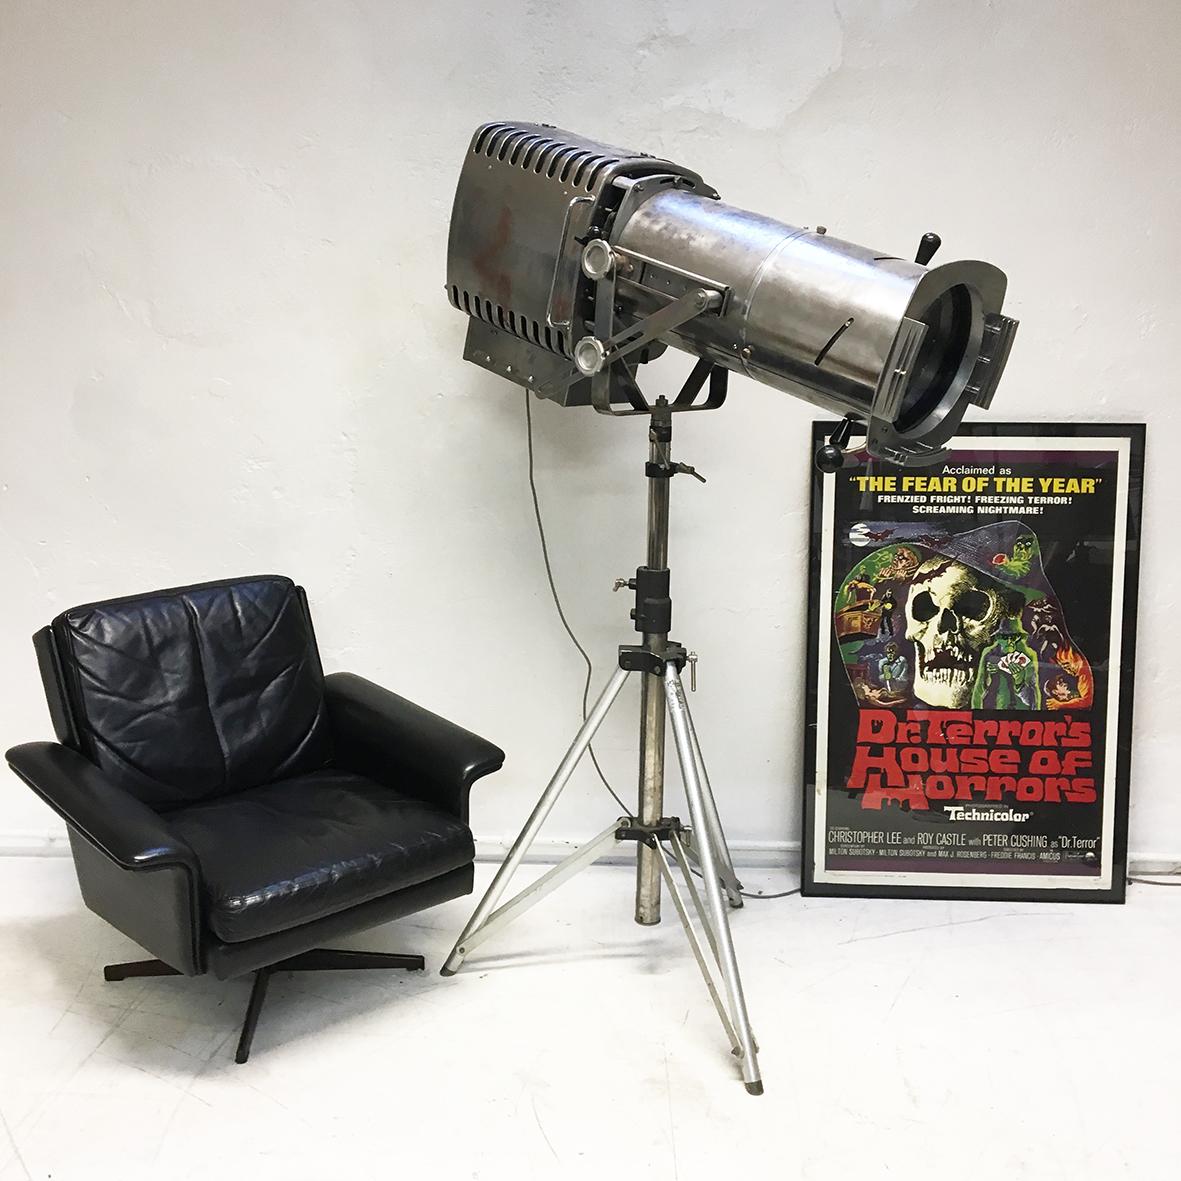 Originally an electric ‘following spot’ stage light model 755 made by the Strand company. This fantastic tripod lamp has at some point been converted to a home interior feature lighting piece. The substantial pressed steel body on stand, has been